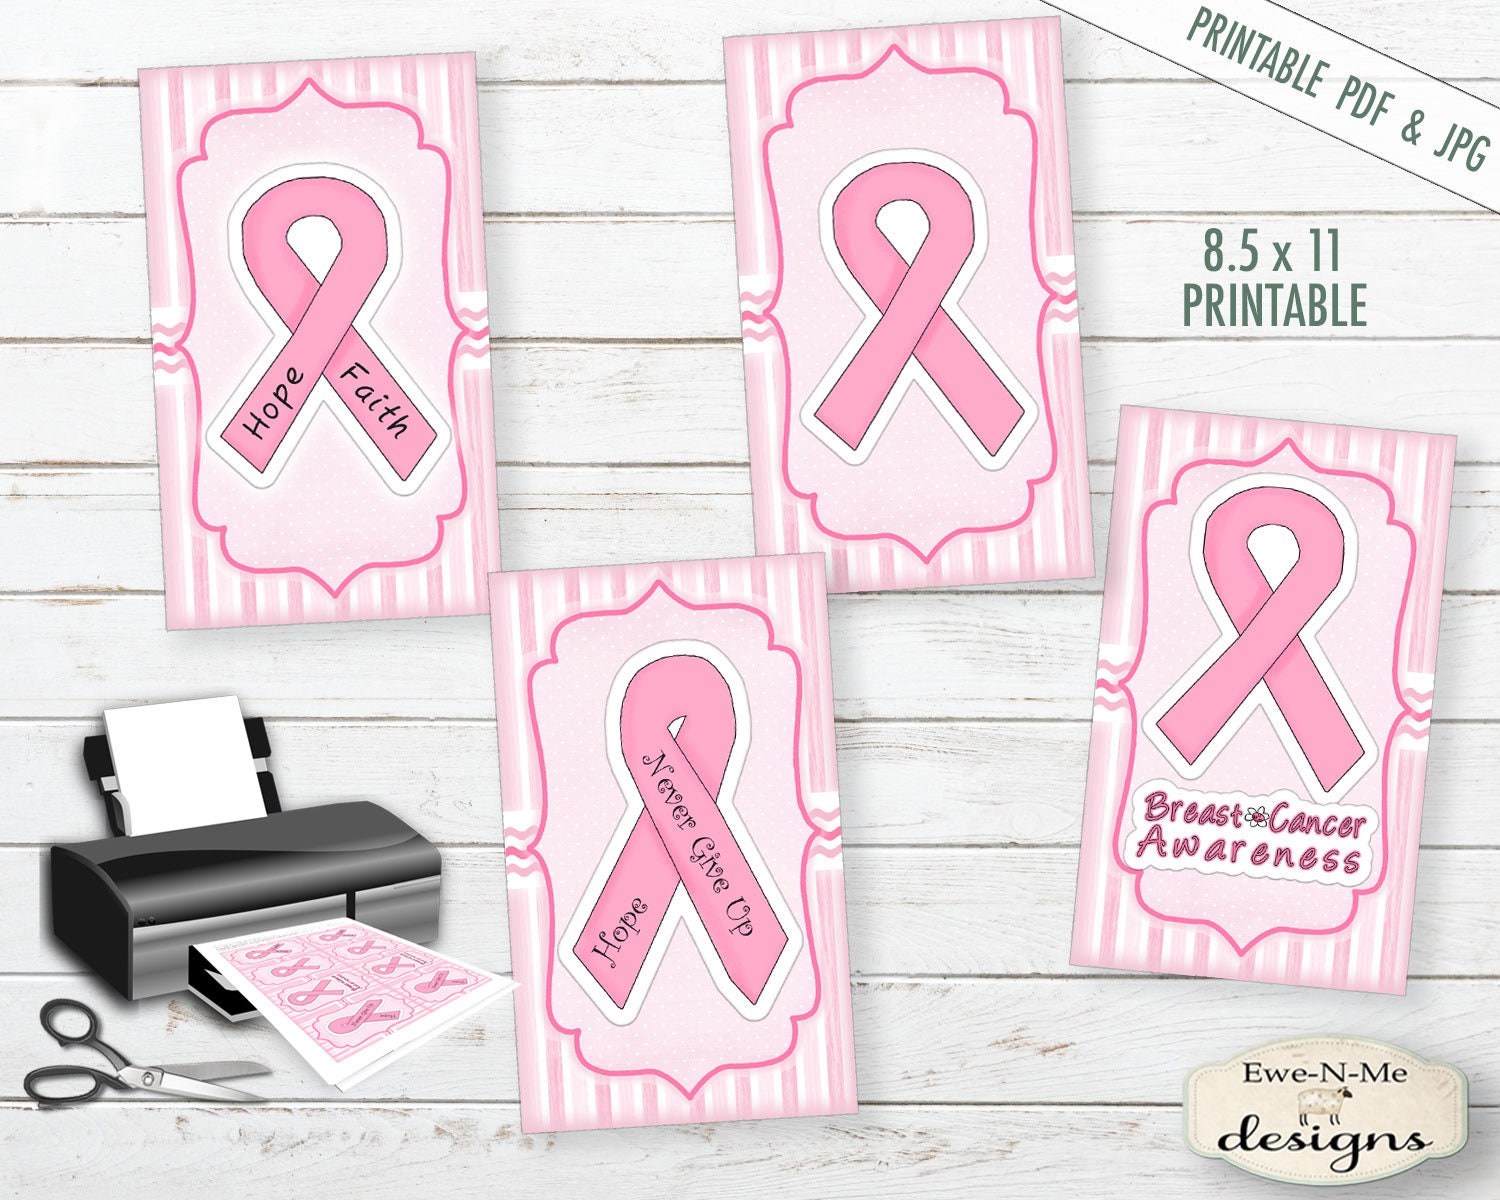 Tassen & portemonnees Bagage & Reizen Bagageriemen Breast Cancer handle cover •  Breast Cancer luggage wrap • handle cover • personalized Bogg bag wrap • Breast Cancer bag handle wrap • 